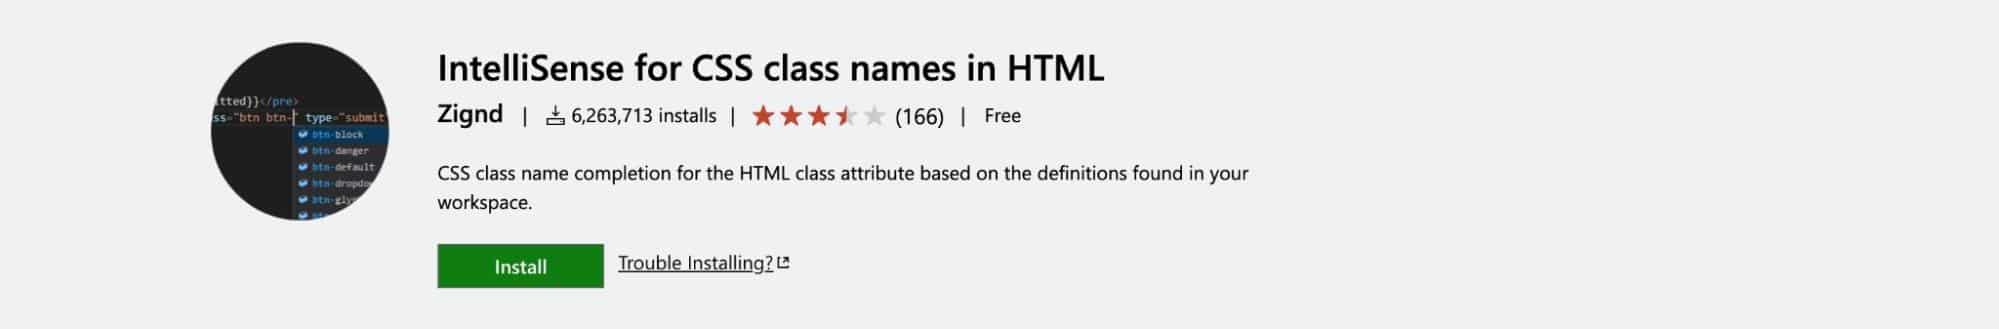 Extension IntelliSense for CSS class names in HTML.